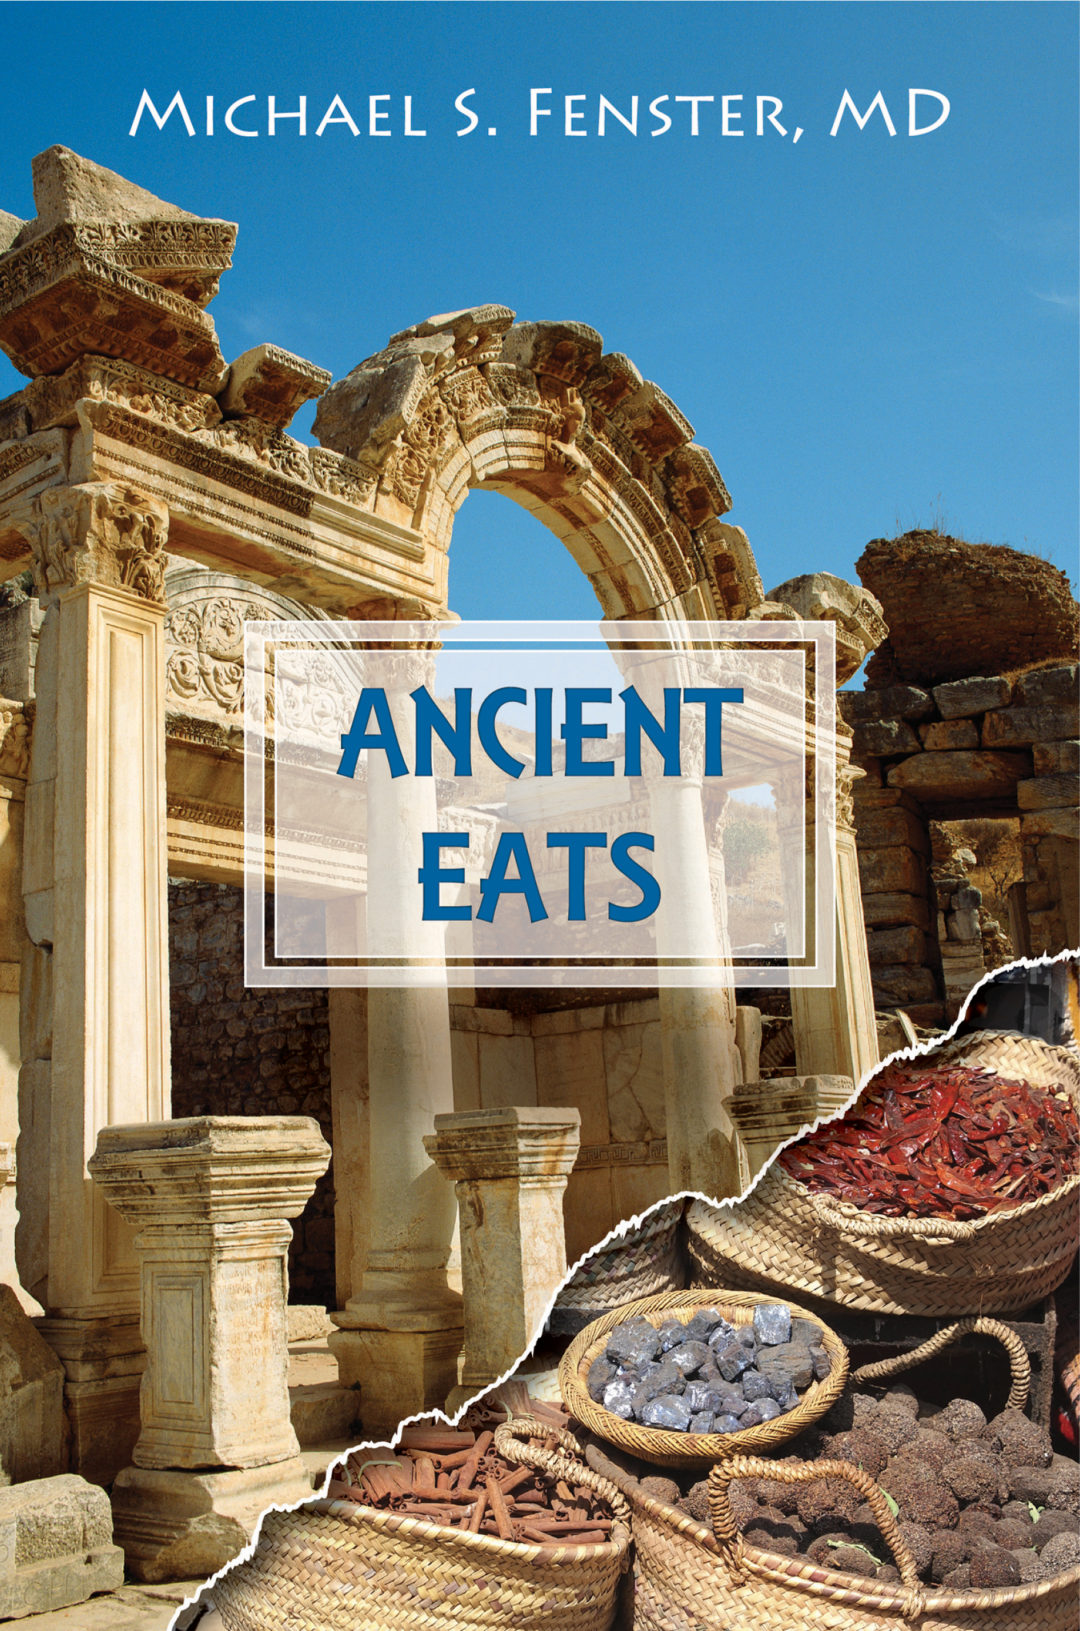 Ancient Eats: The Greeks and The Vikings